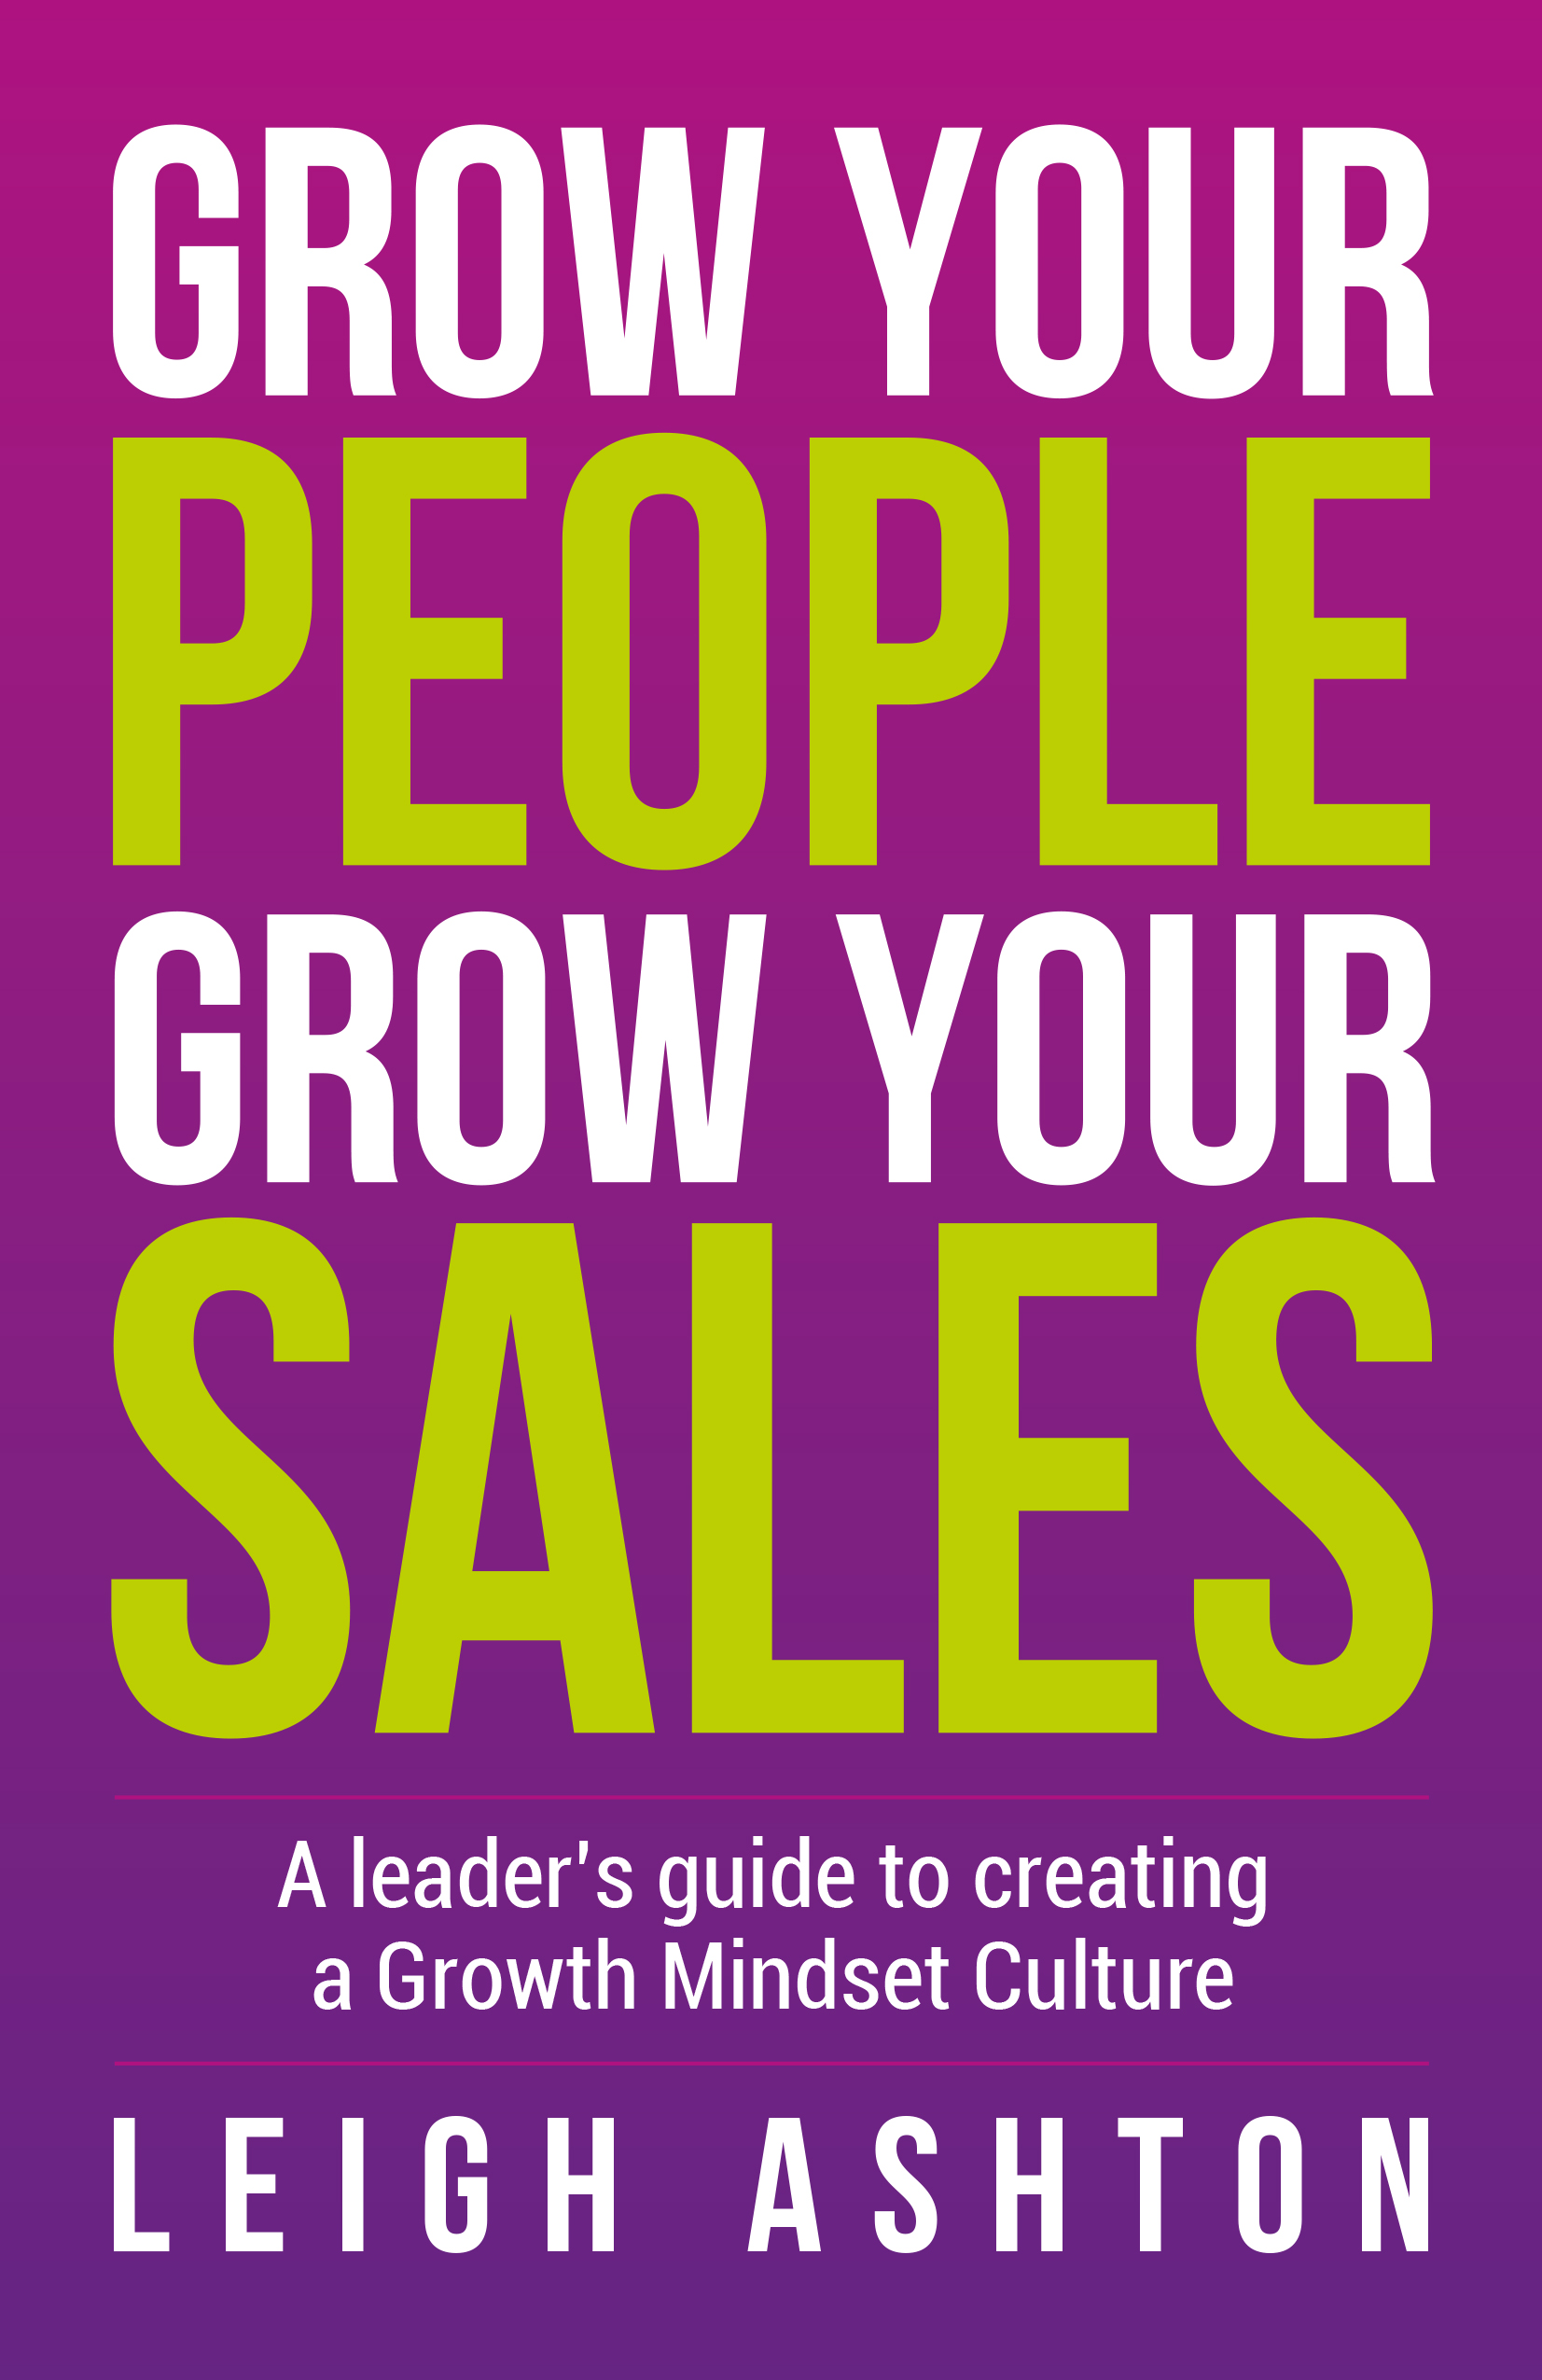 Grow Your People, Grow Your Sales